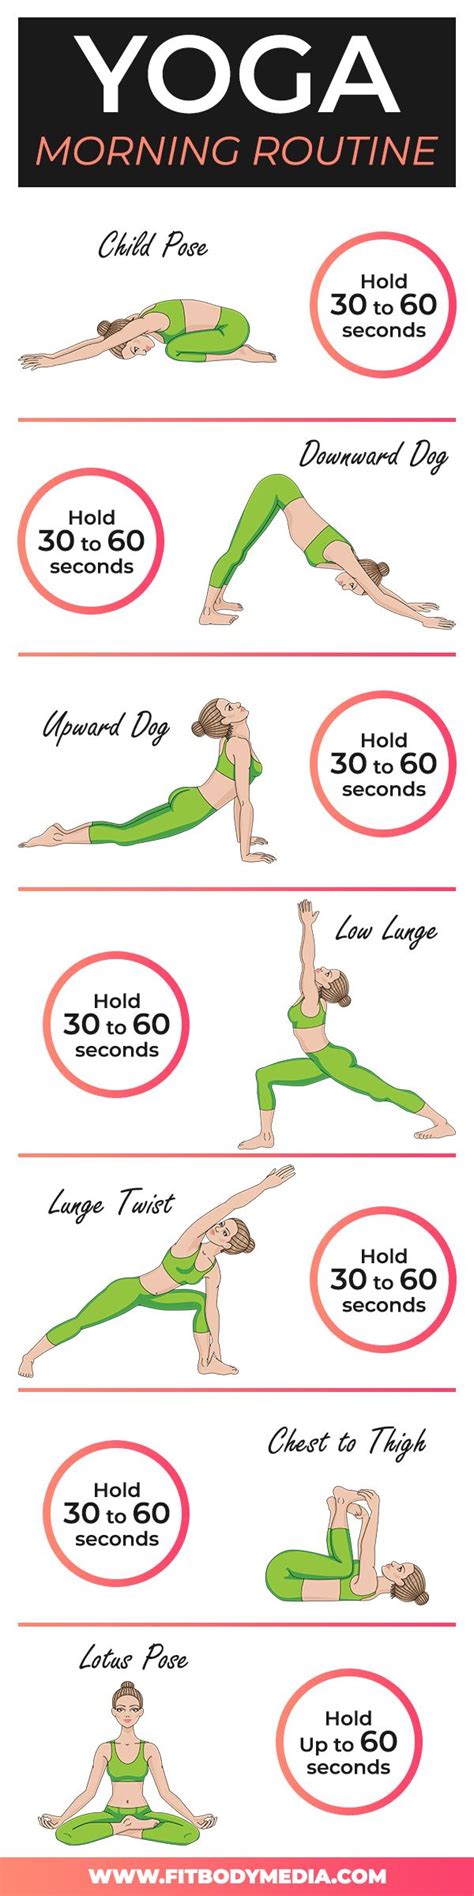 This 10 Minute Morning Yoga Routine For Beginners Will Help You Tone